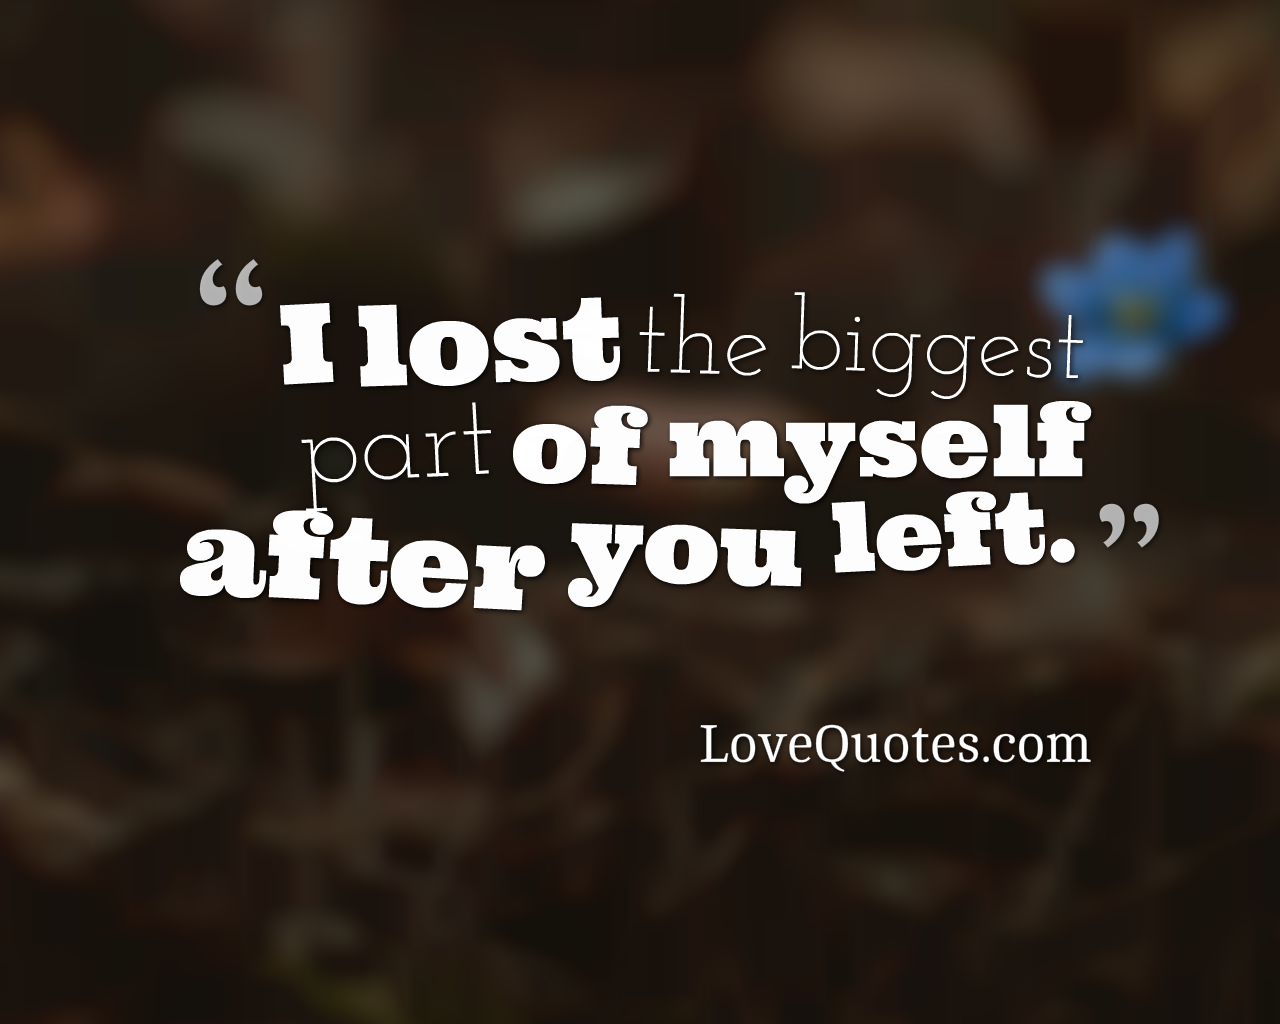 After You Left